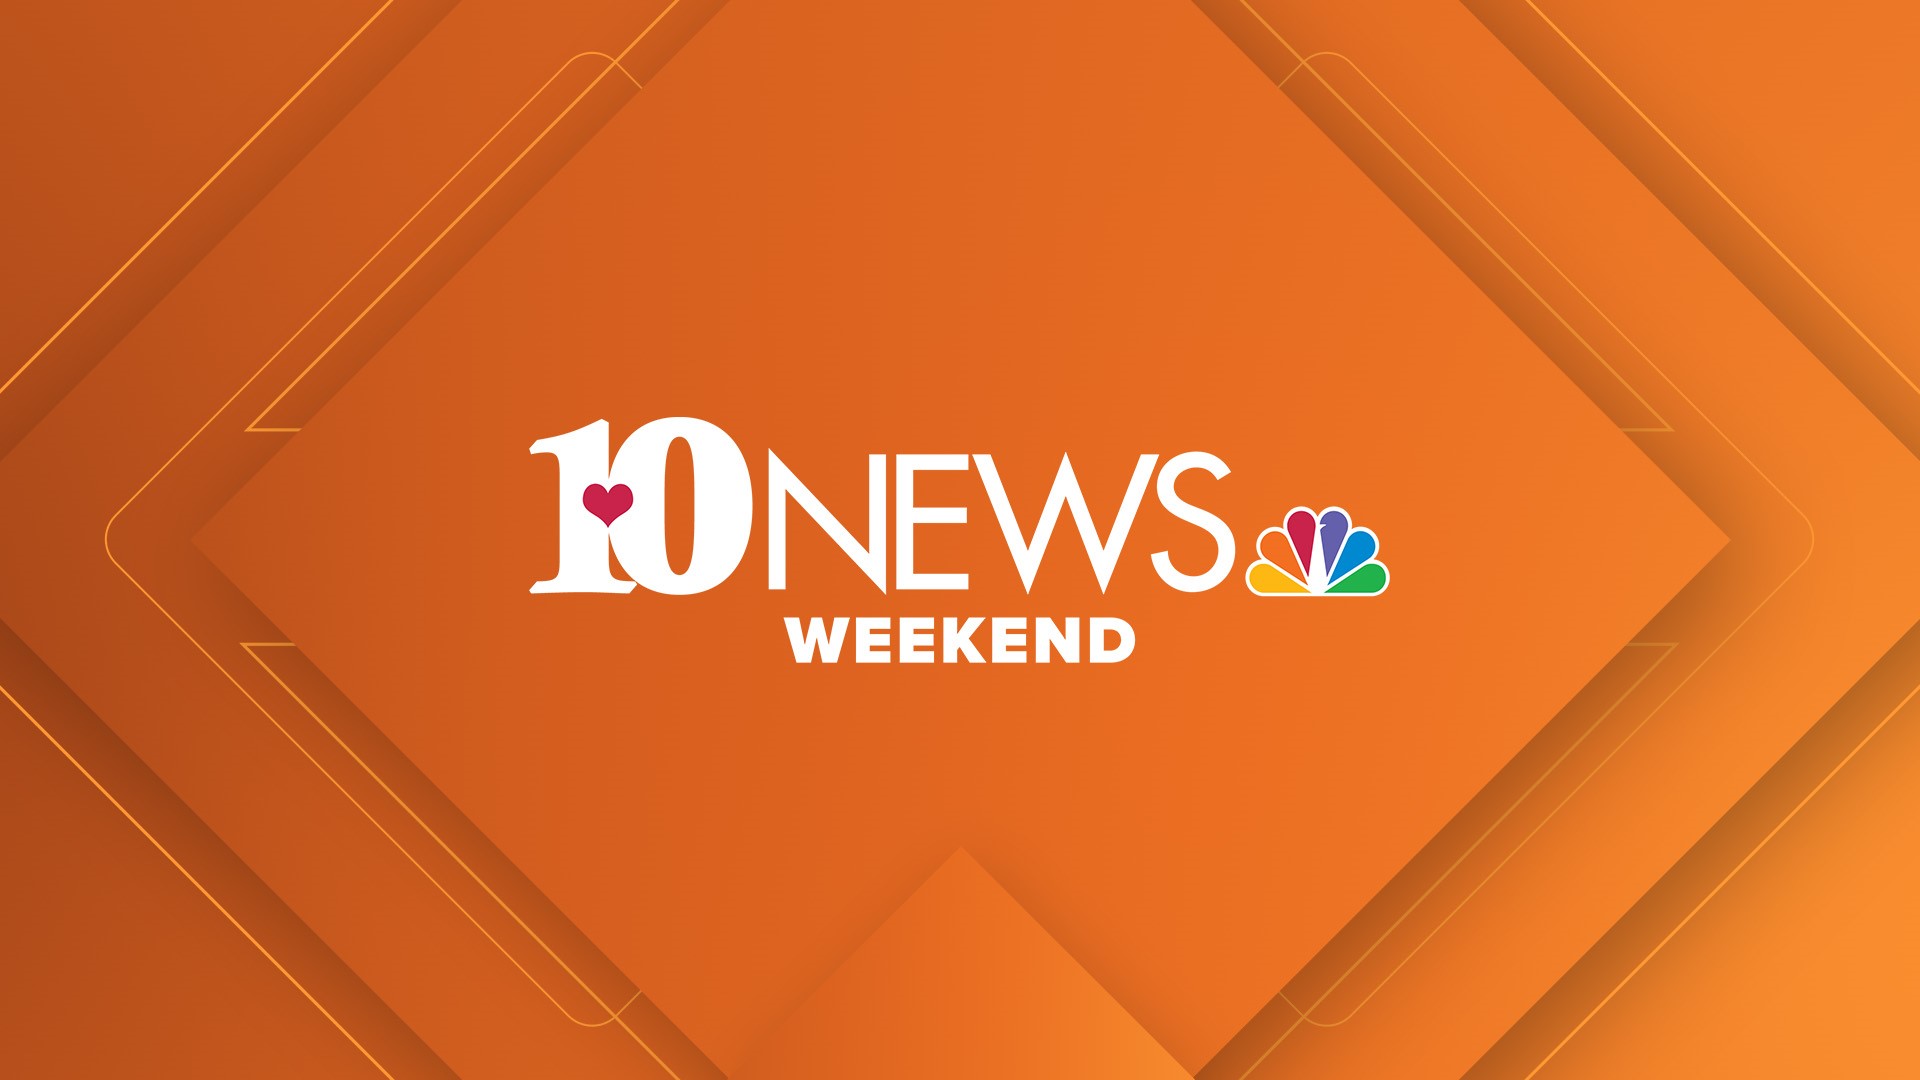 Wake up with WBIR for all the latest weekend news, weather, traffic and sports updates Straight from the Heart of Knoxville and East Tennessee.